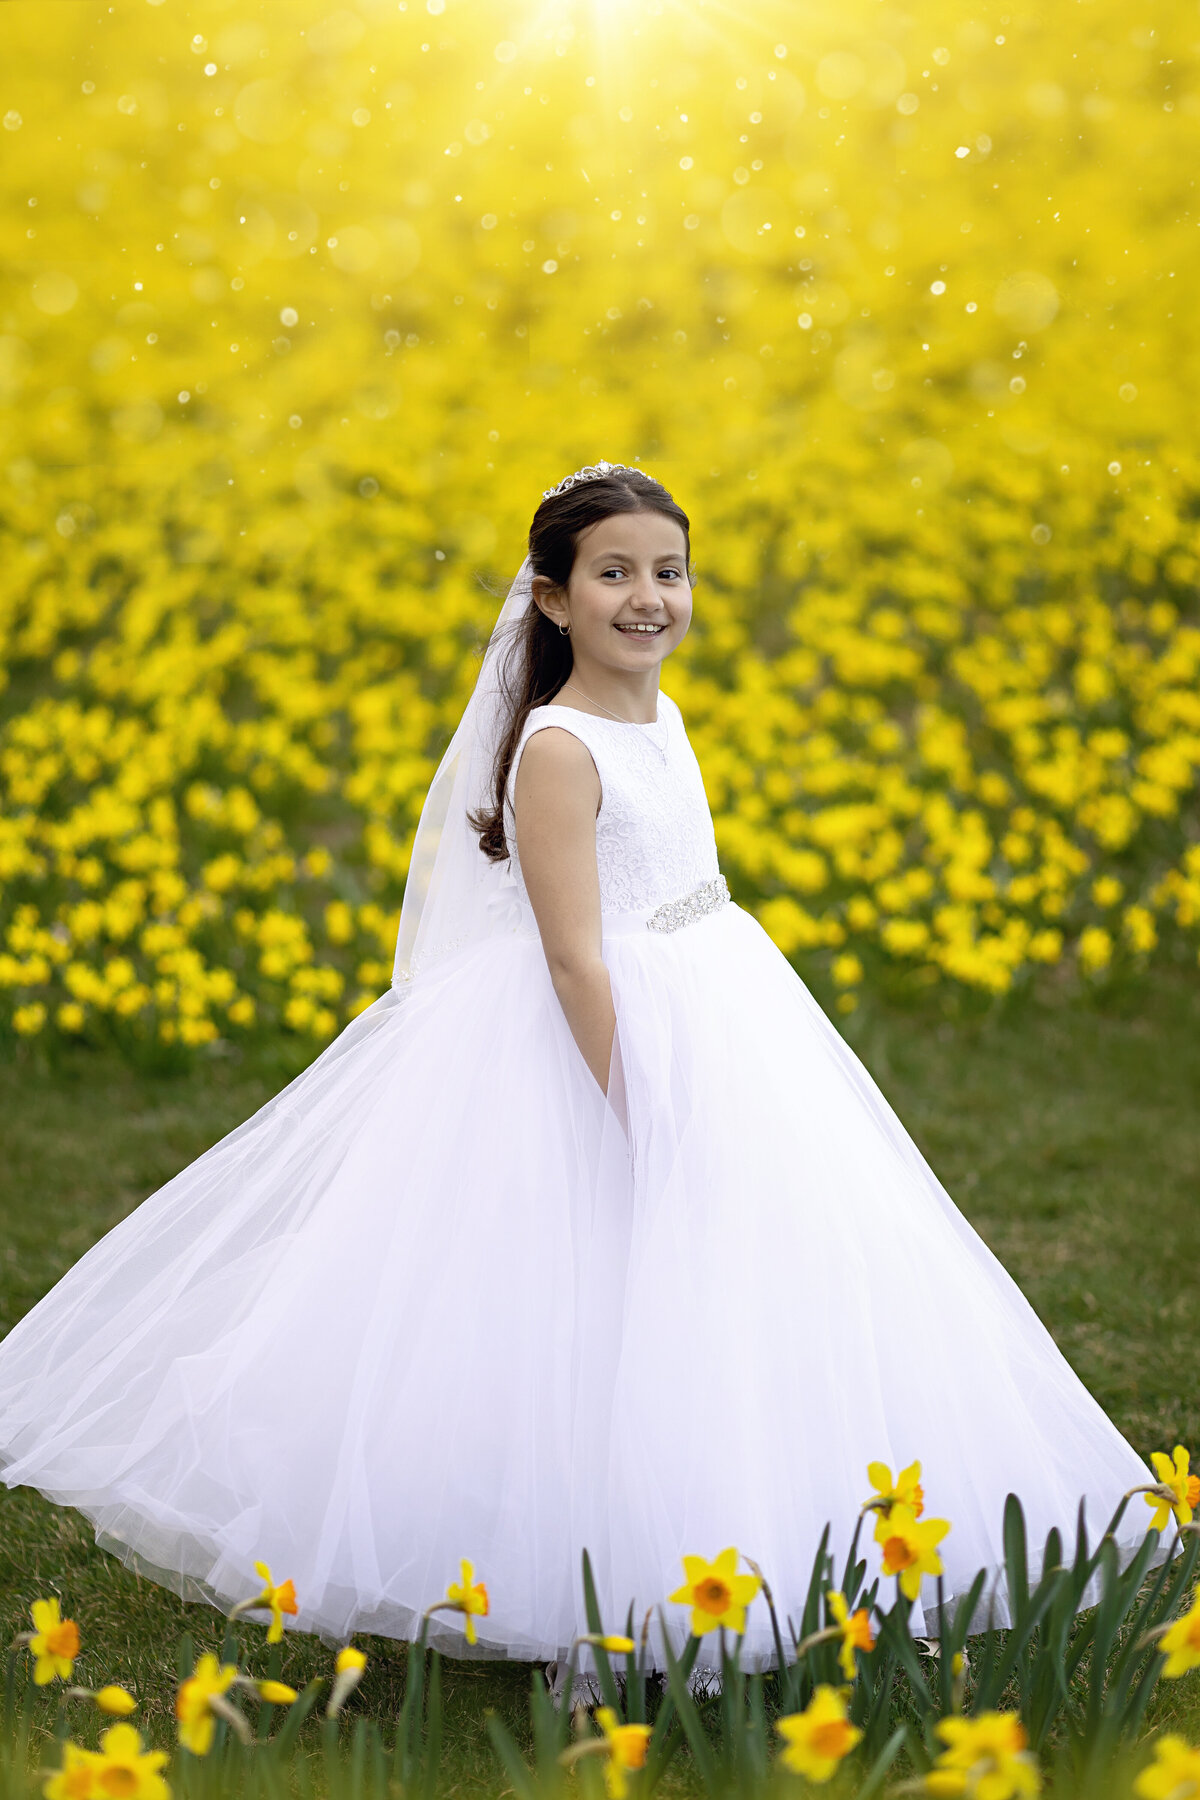 A young girl in a large white dress smiles while walking through a field of yellow daffodils